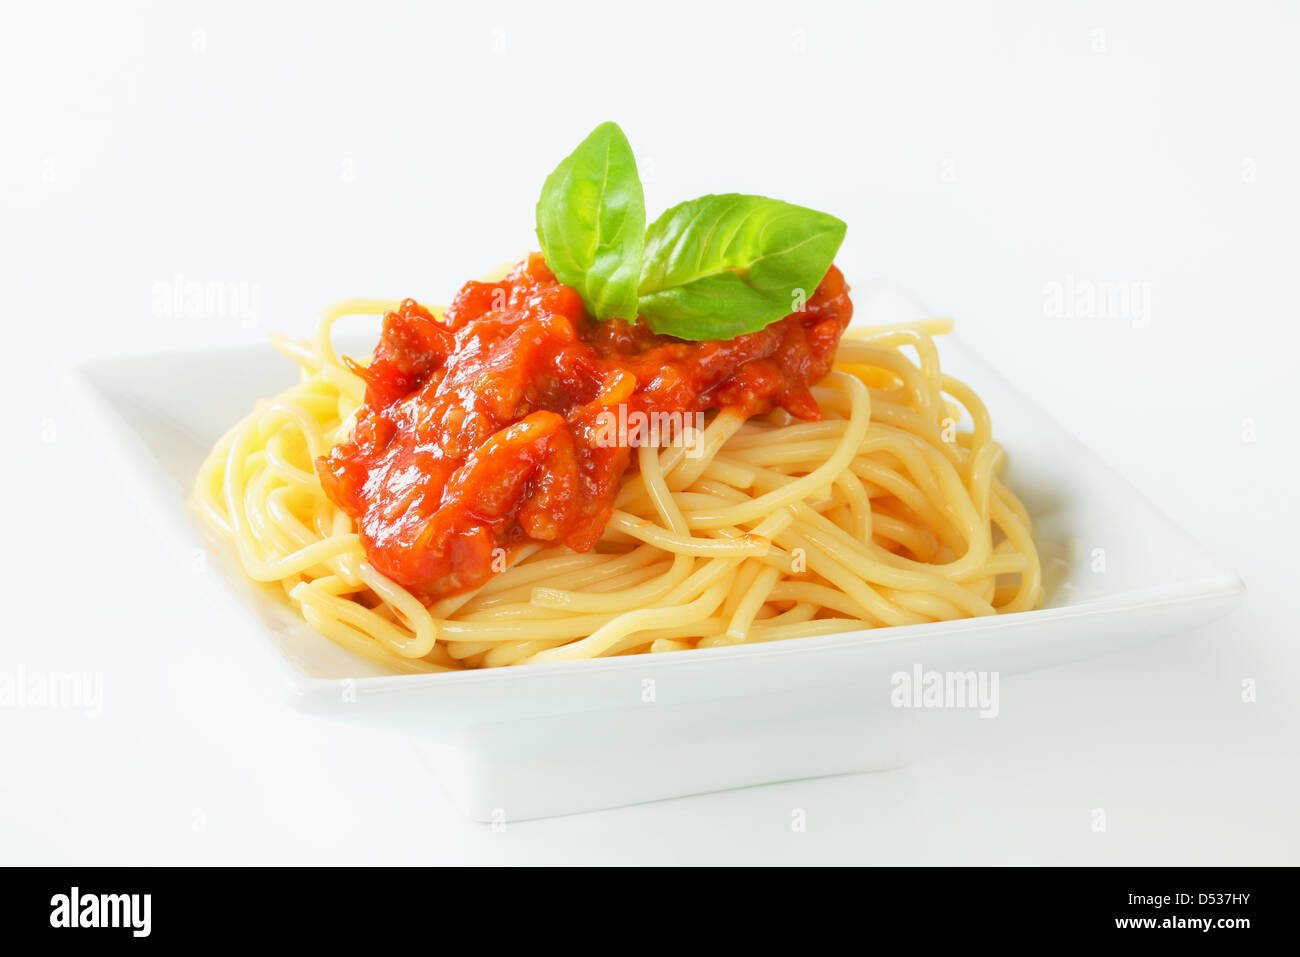 Spaghetti with sweet and sour sauce Stock Photo